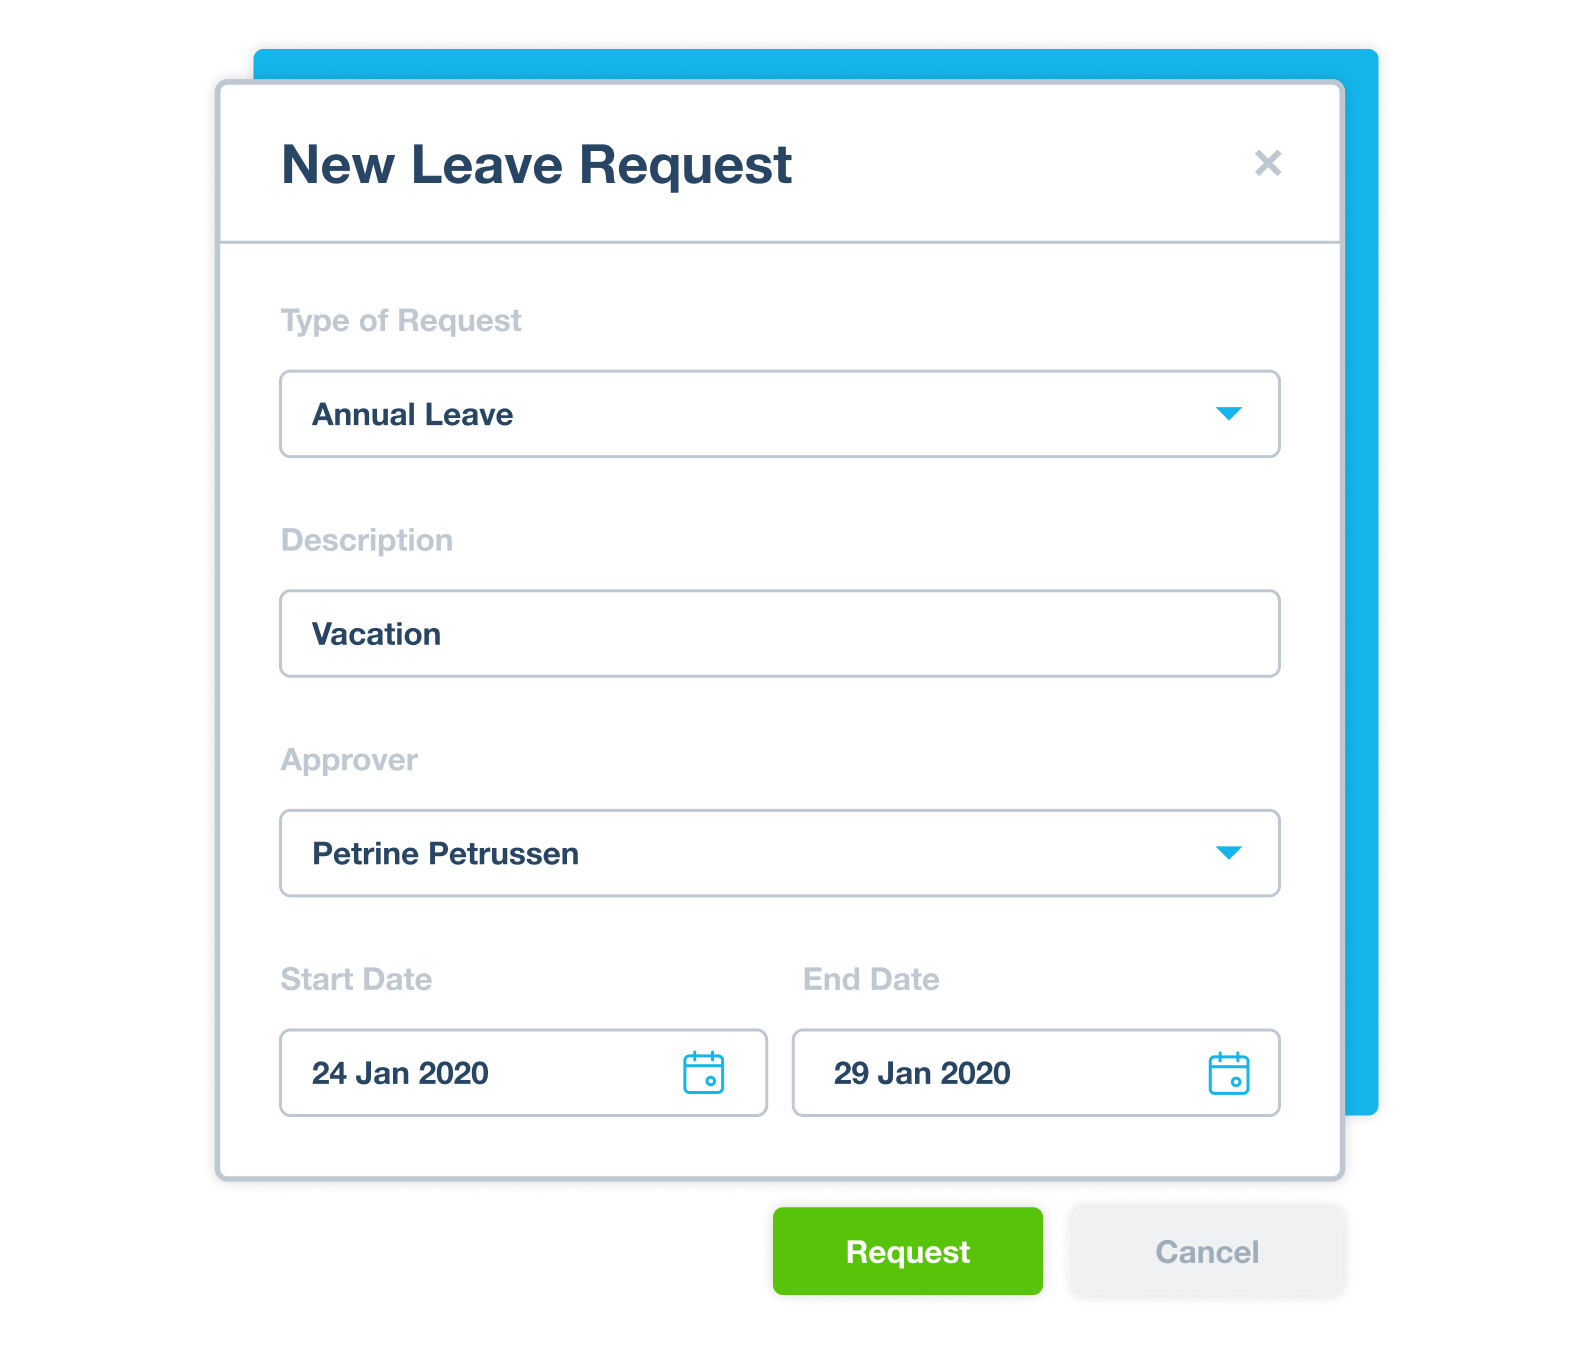 A request for annual leave is being completed online using the Xero Me payroll app.